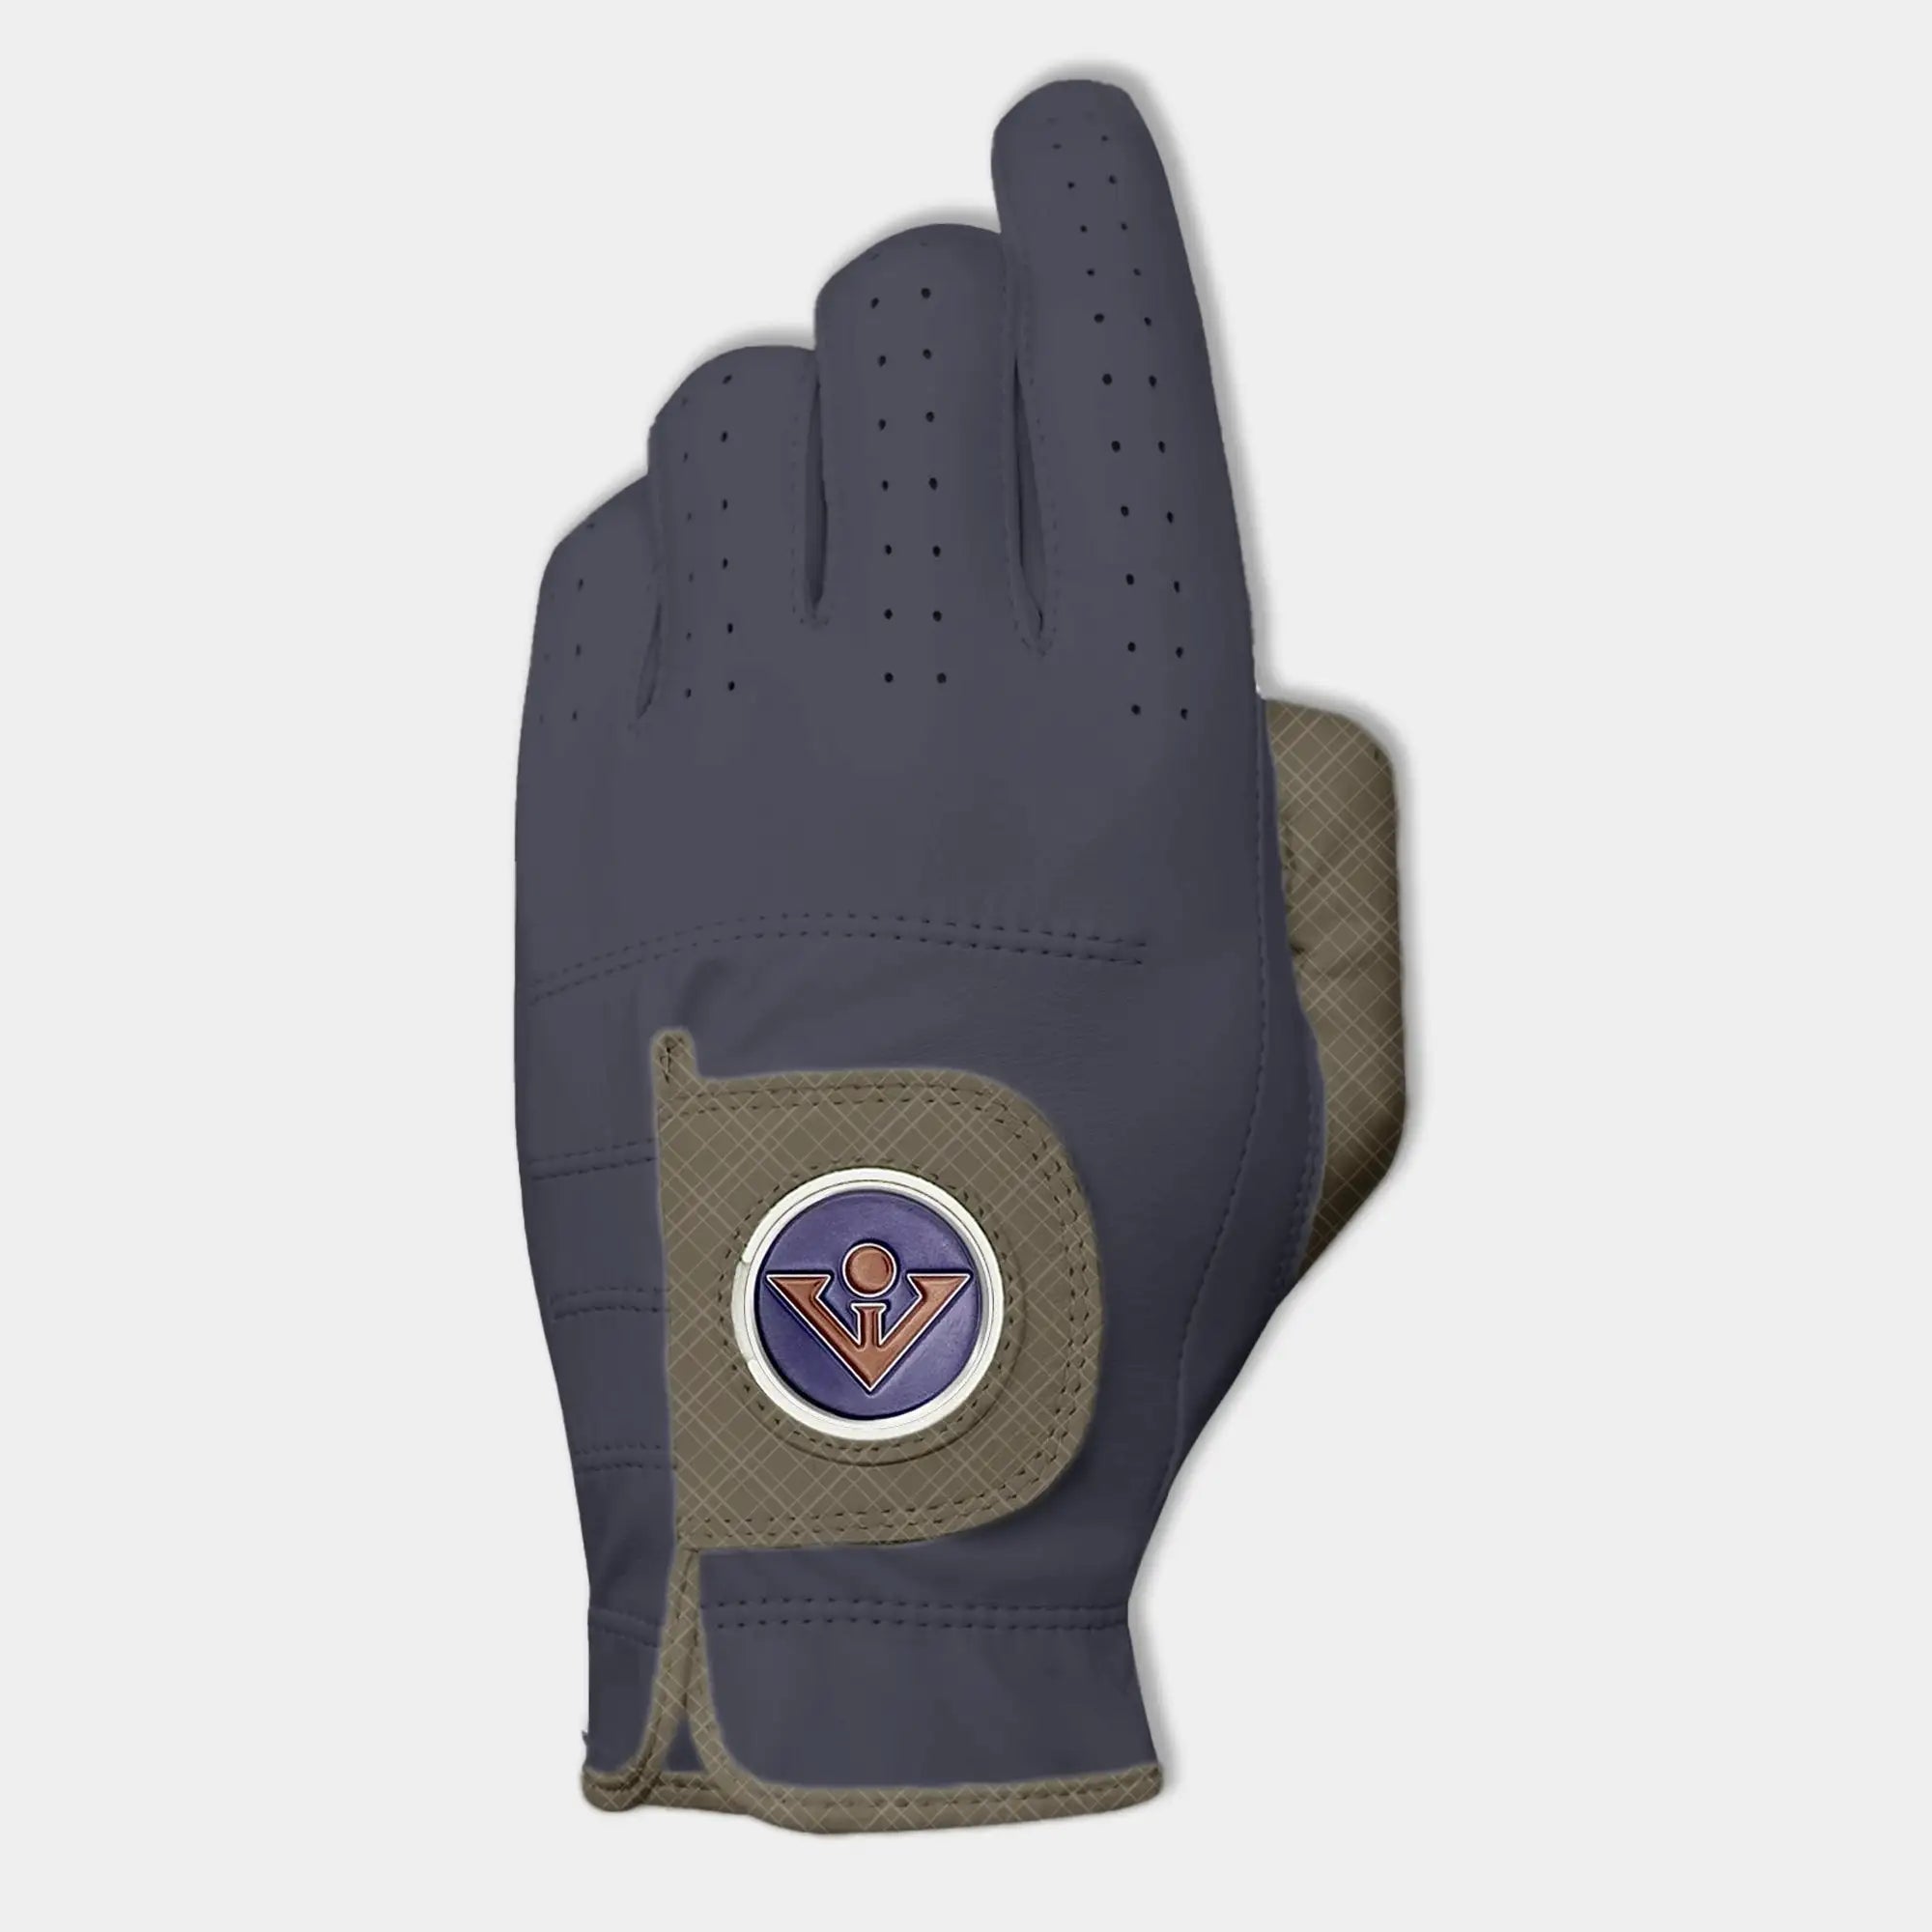 Women's Blue Golf Glove with Brown Pull Tab and Brown Thumb.